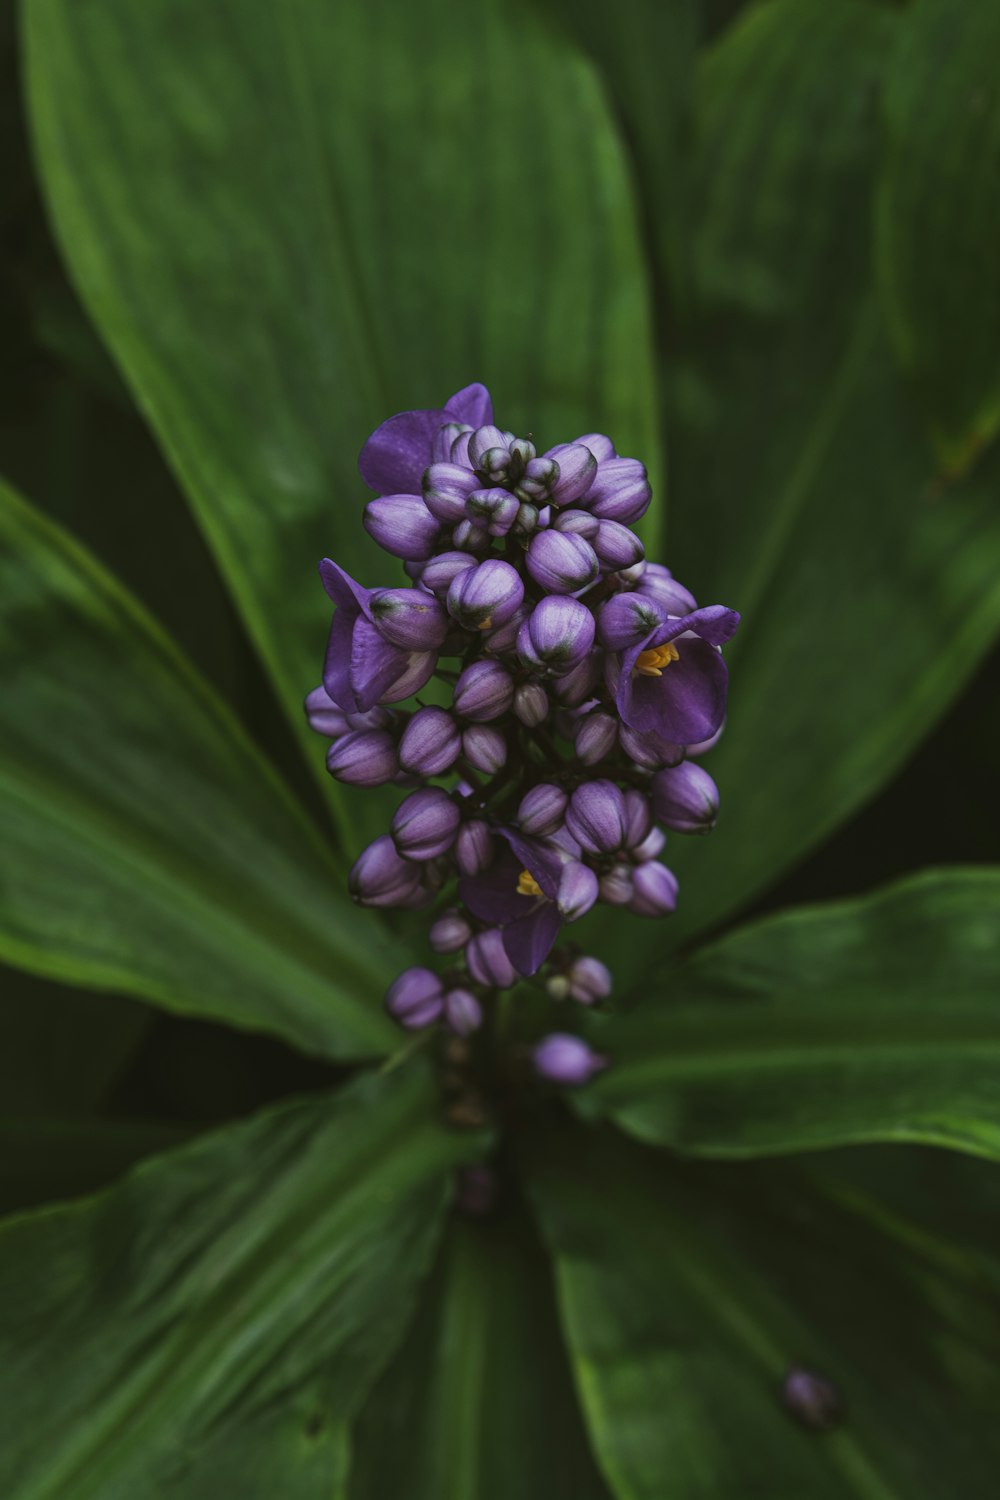 a close up of a purple flower on a green plant